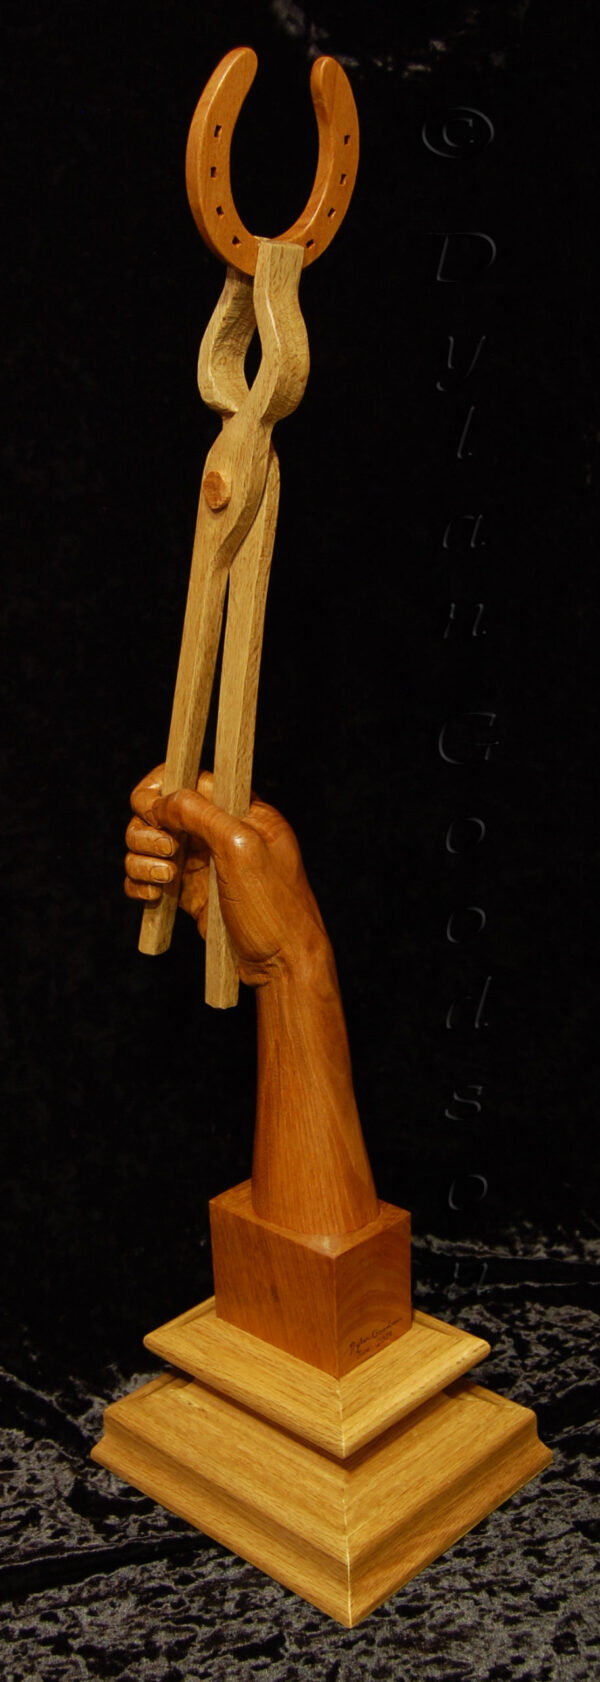 woodcarving of a hand holding tongs holding a horseshoe